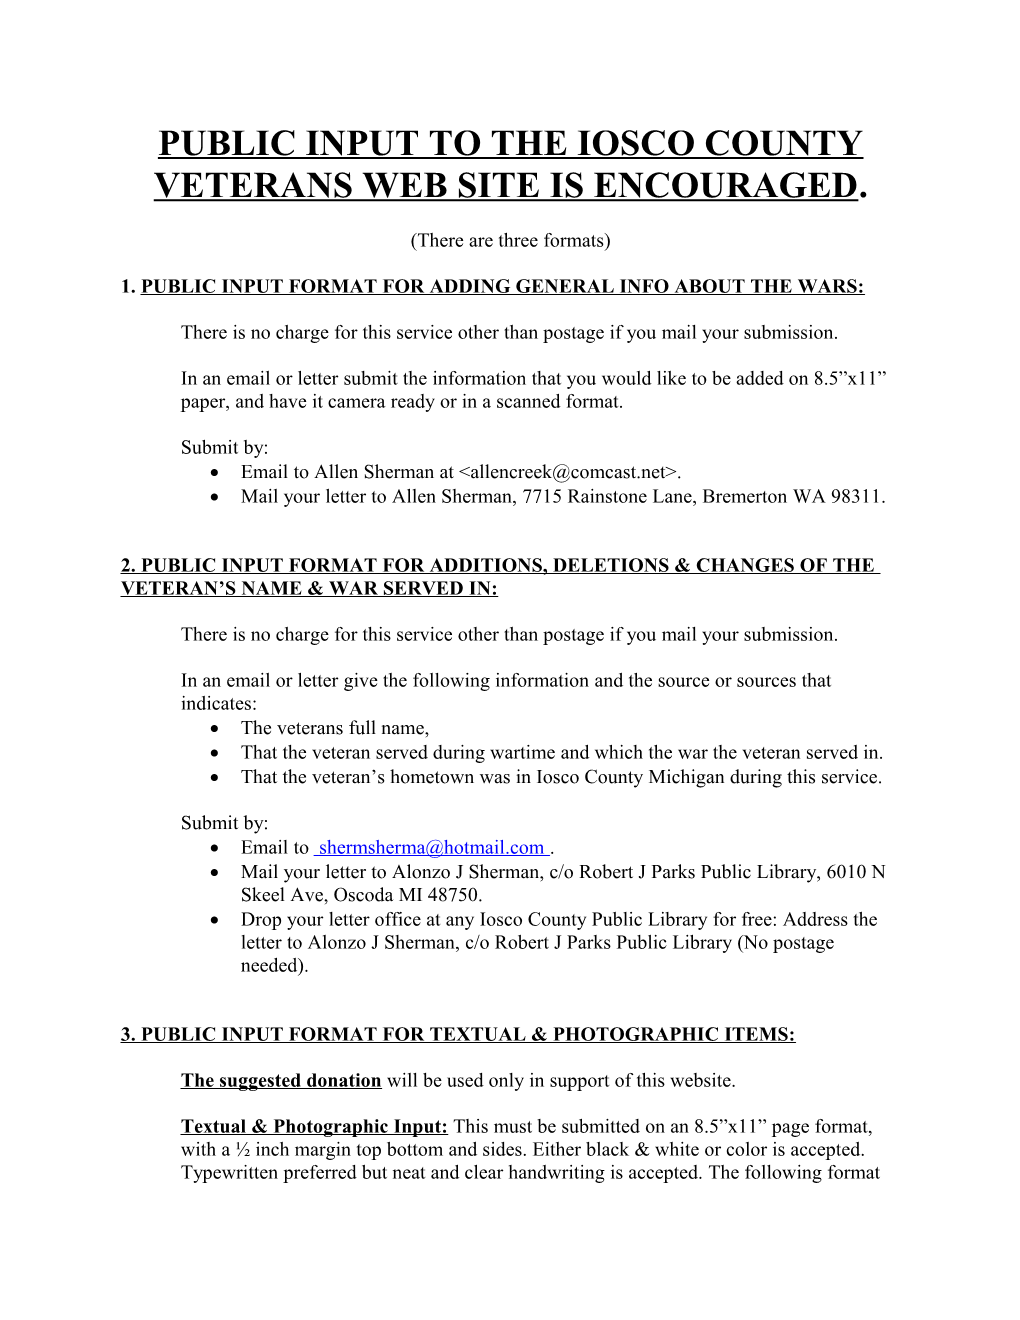 Public Input to the Iosco County Veterans Web Site Is Encouraged